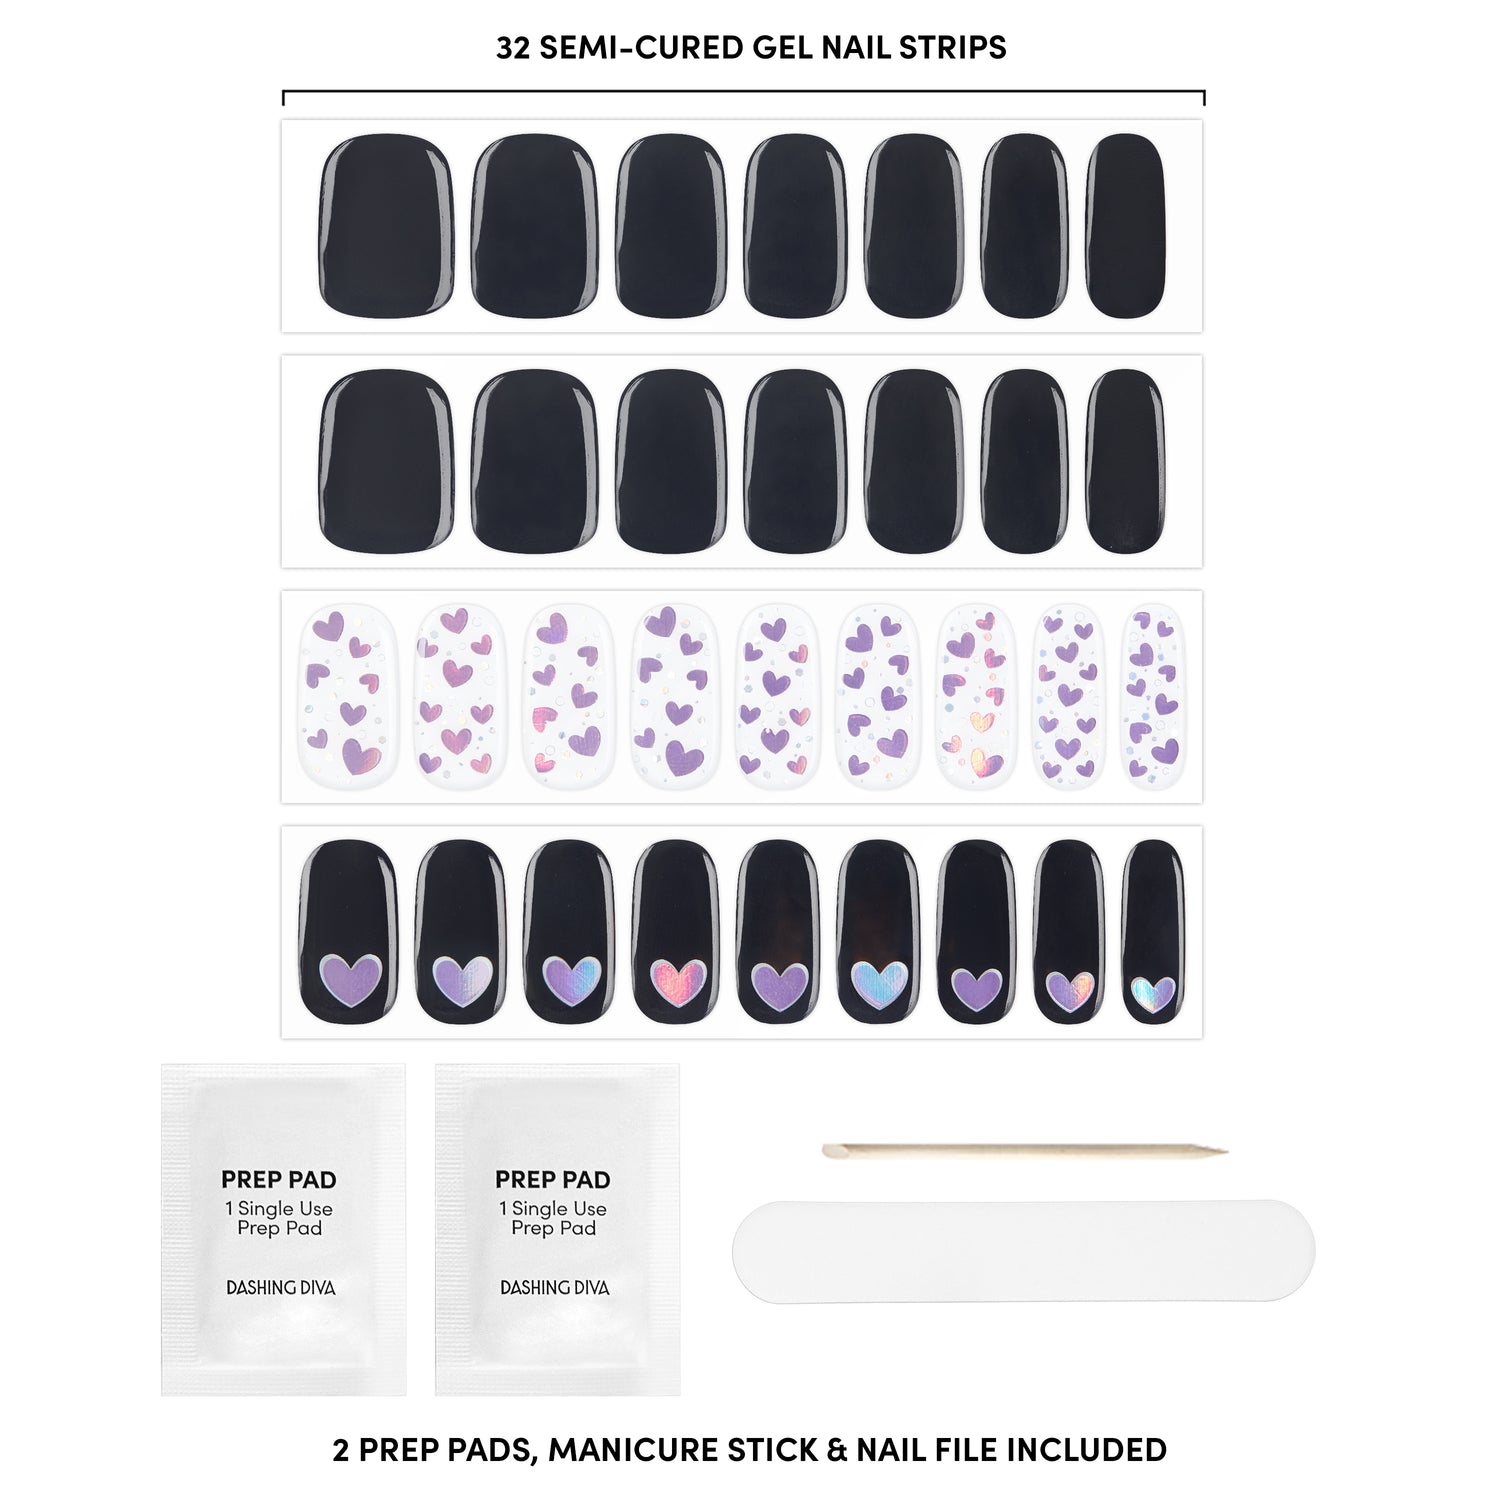 Semi-cured black gel nail strips featuring reflective purple hearts. Nail file, Prep Pad and wooden stick included. 